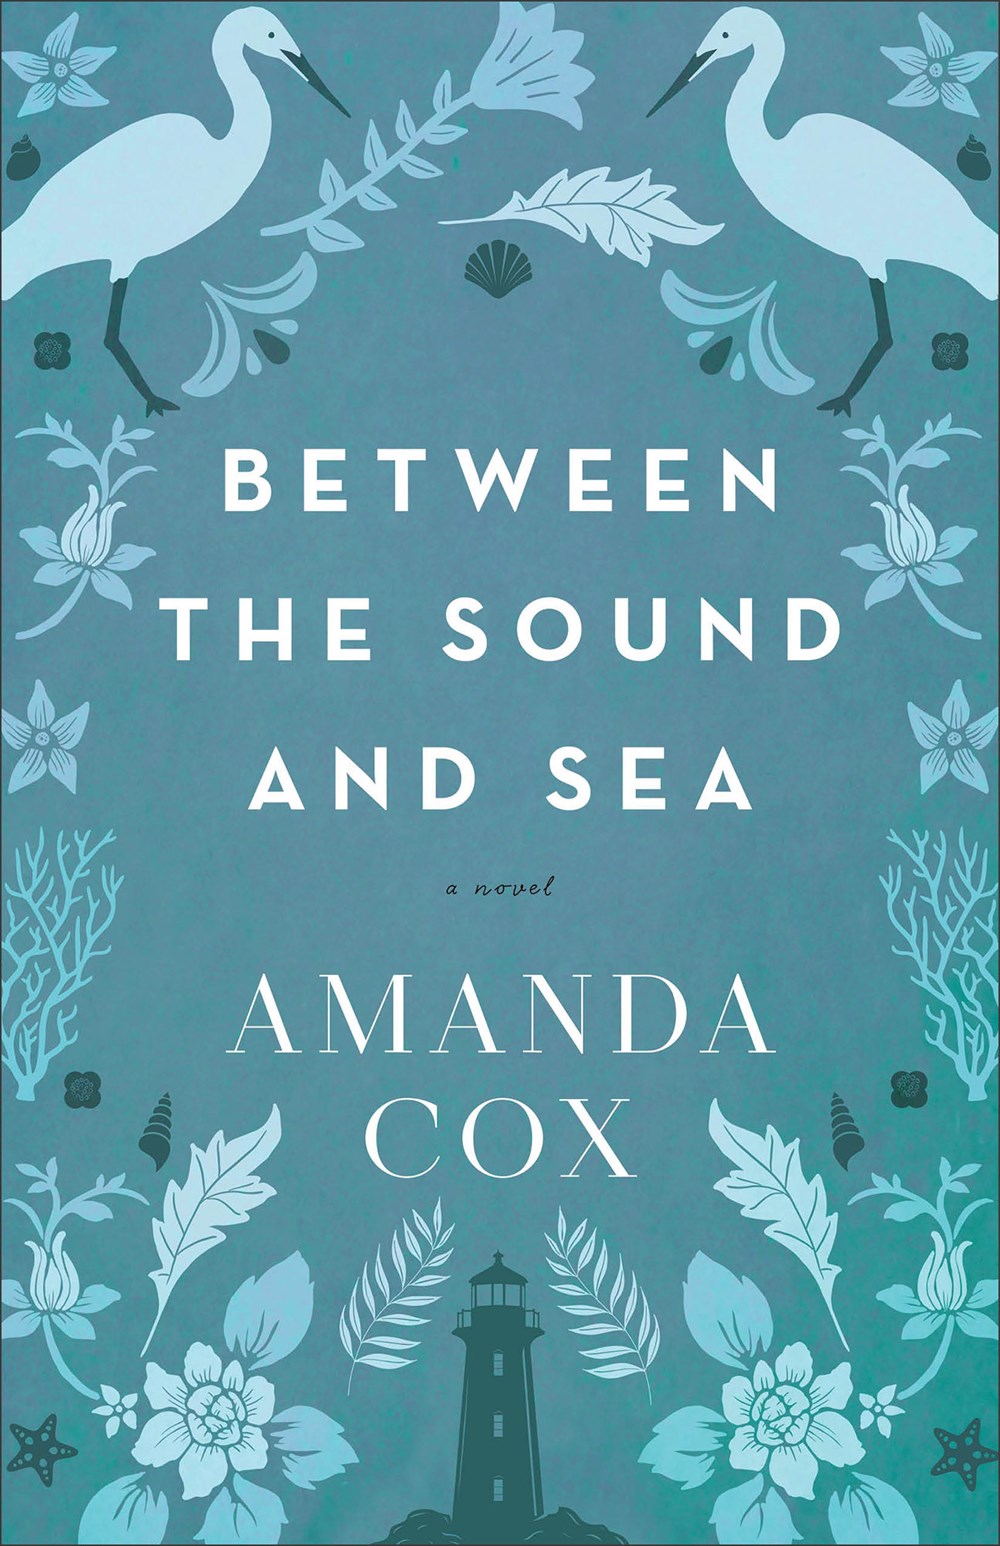 ‘Between the Sound and Sea’ by Amanda Cox | LJ Review of the Day